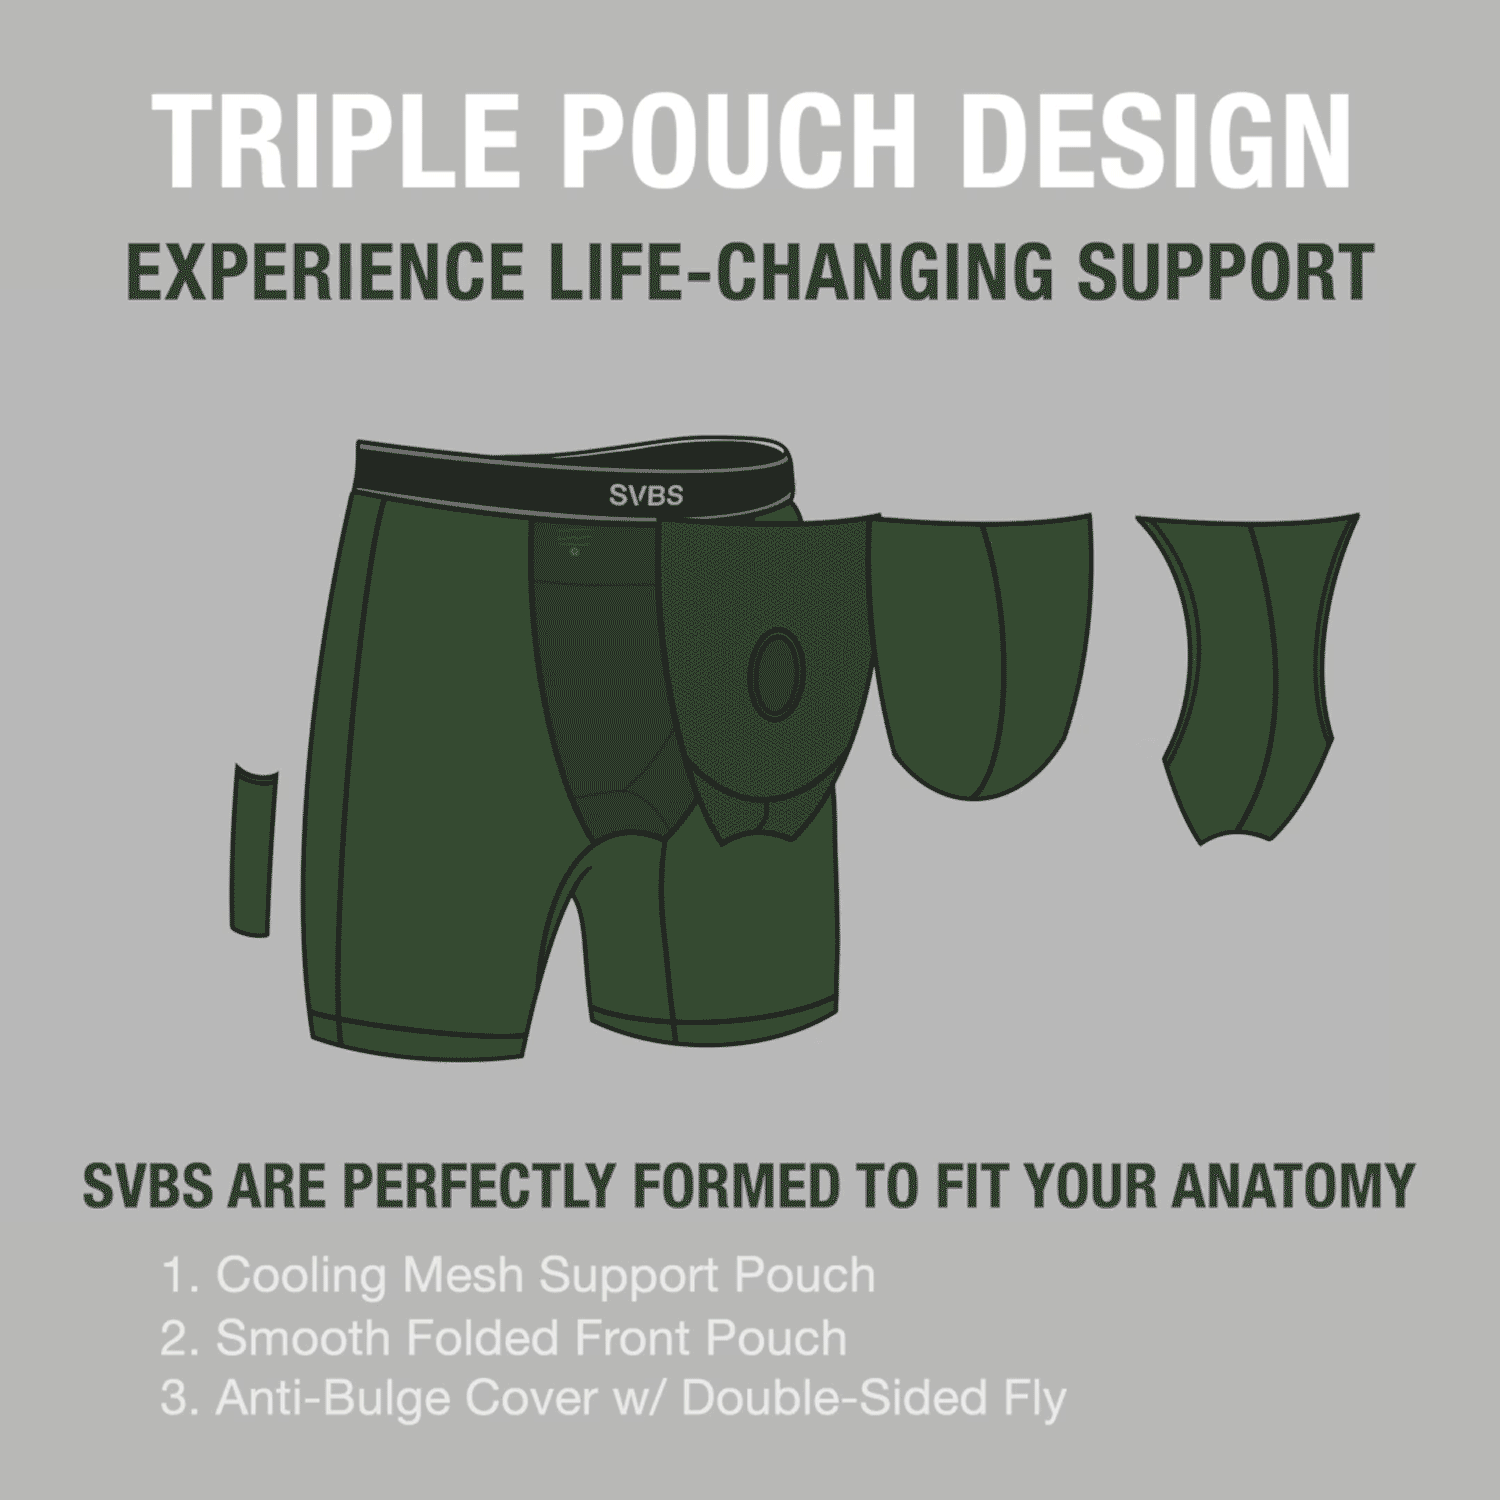 SVBS 3-Pack — SVBS  Most Comfortable Underwear on Earth